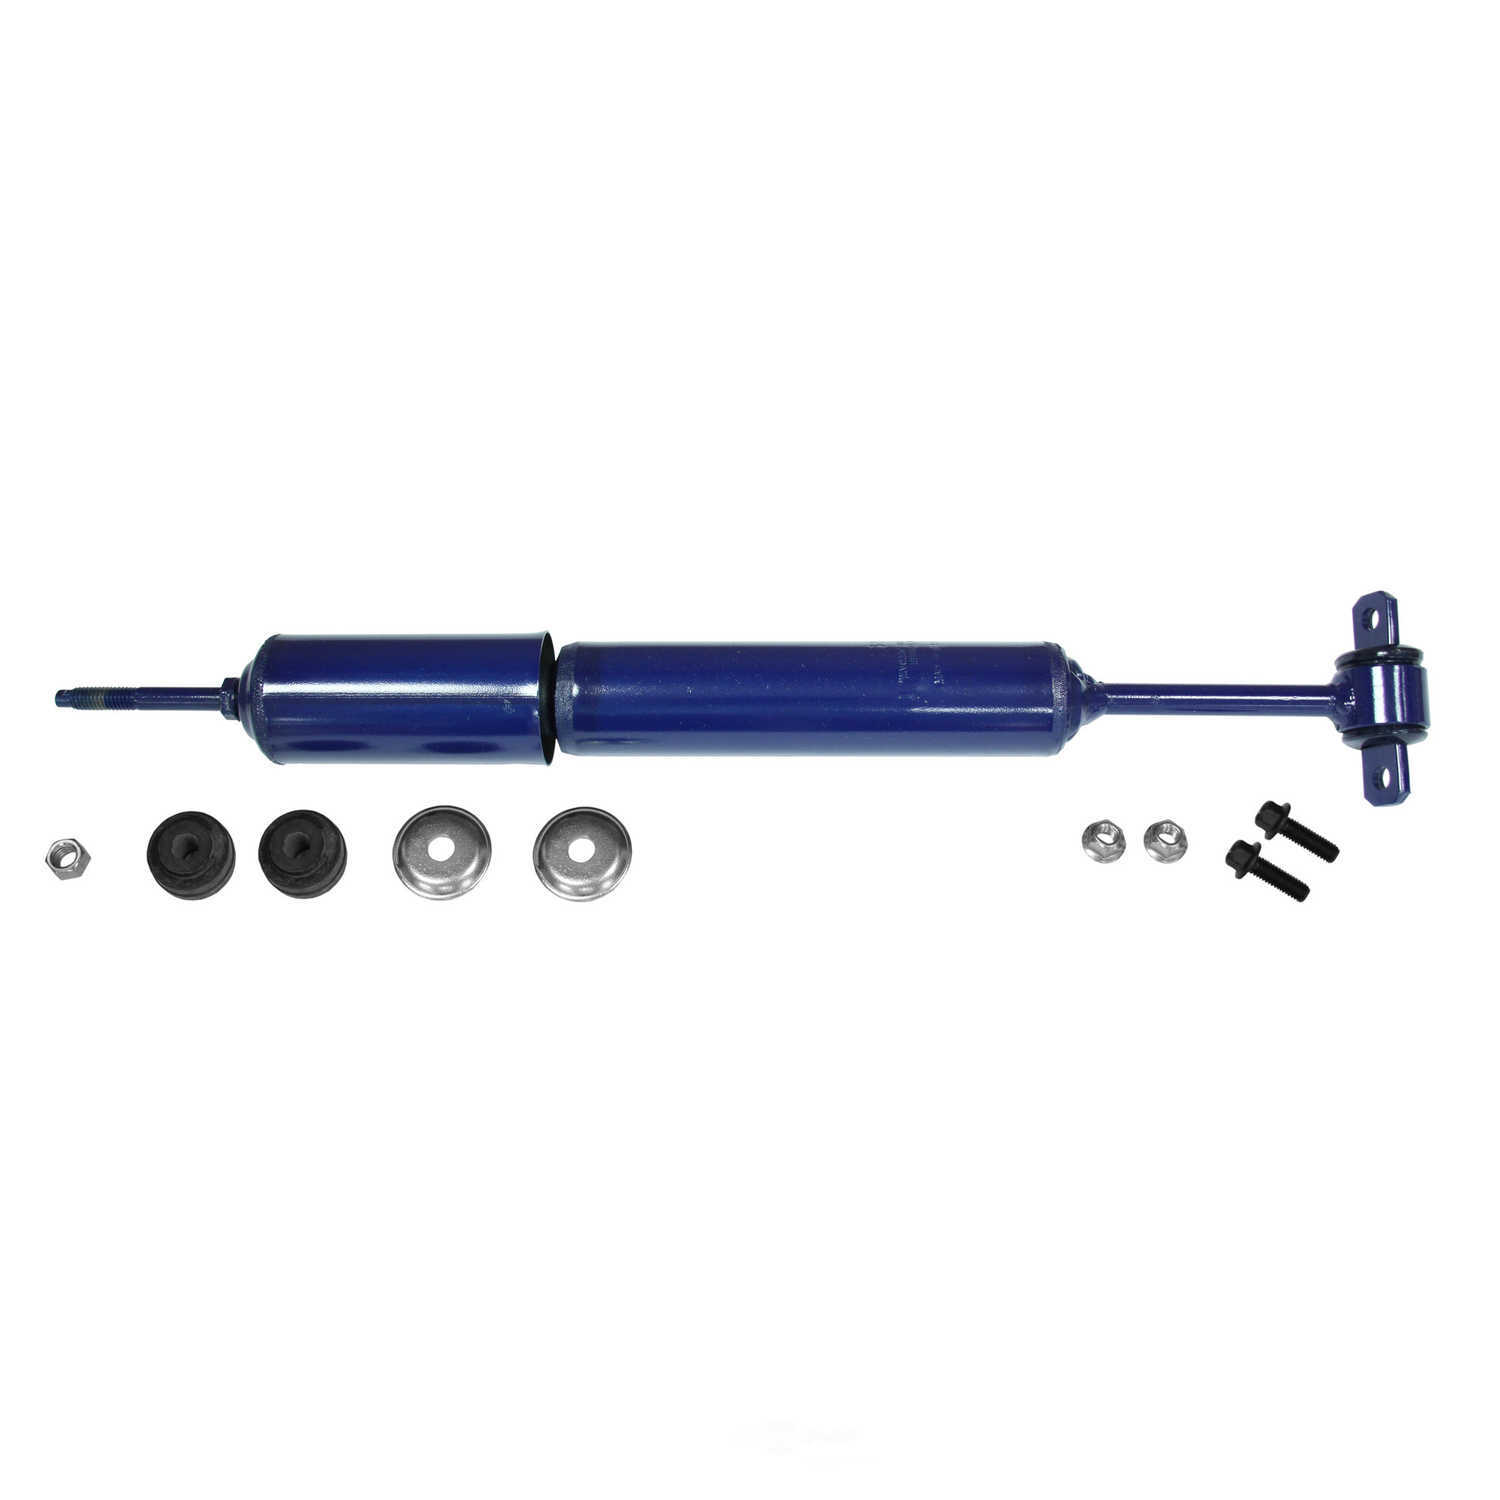 MONROE SHOCKS/STRUTS - Monro-Matic Plus Shock Absorber (With ABS Brakes, Front) - MOE 32296